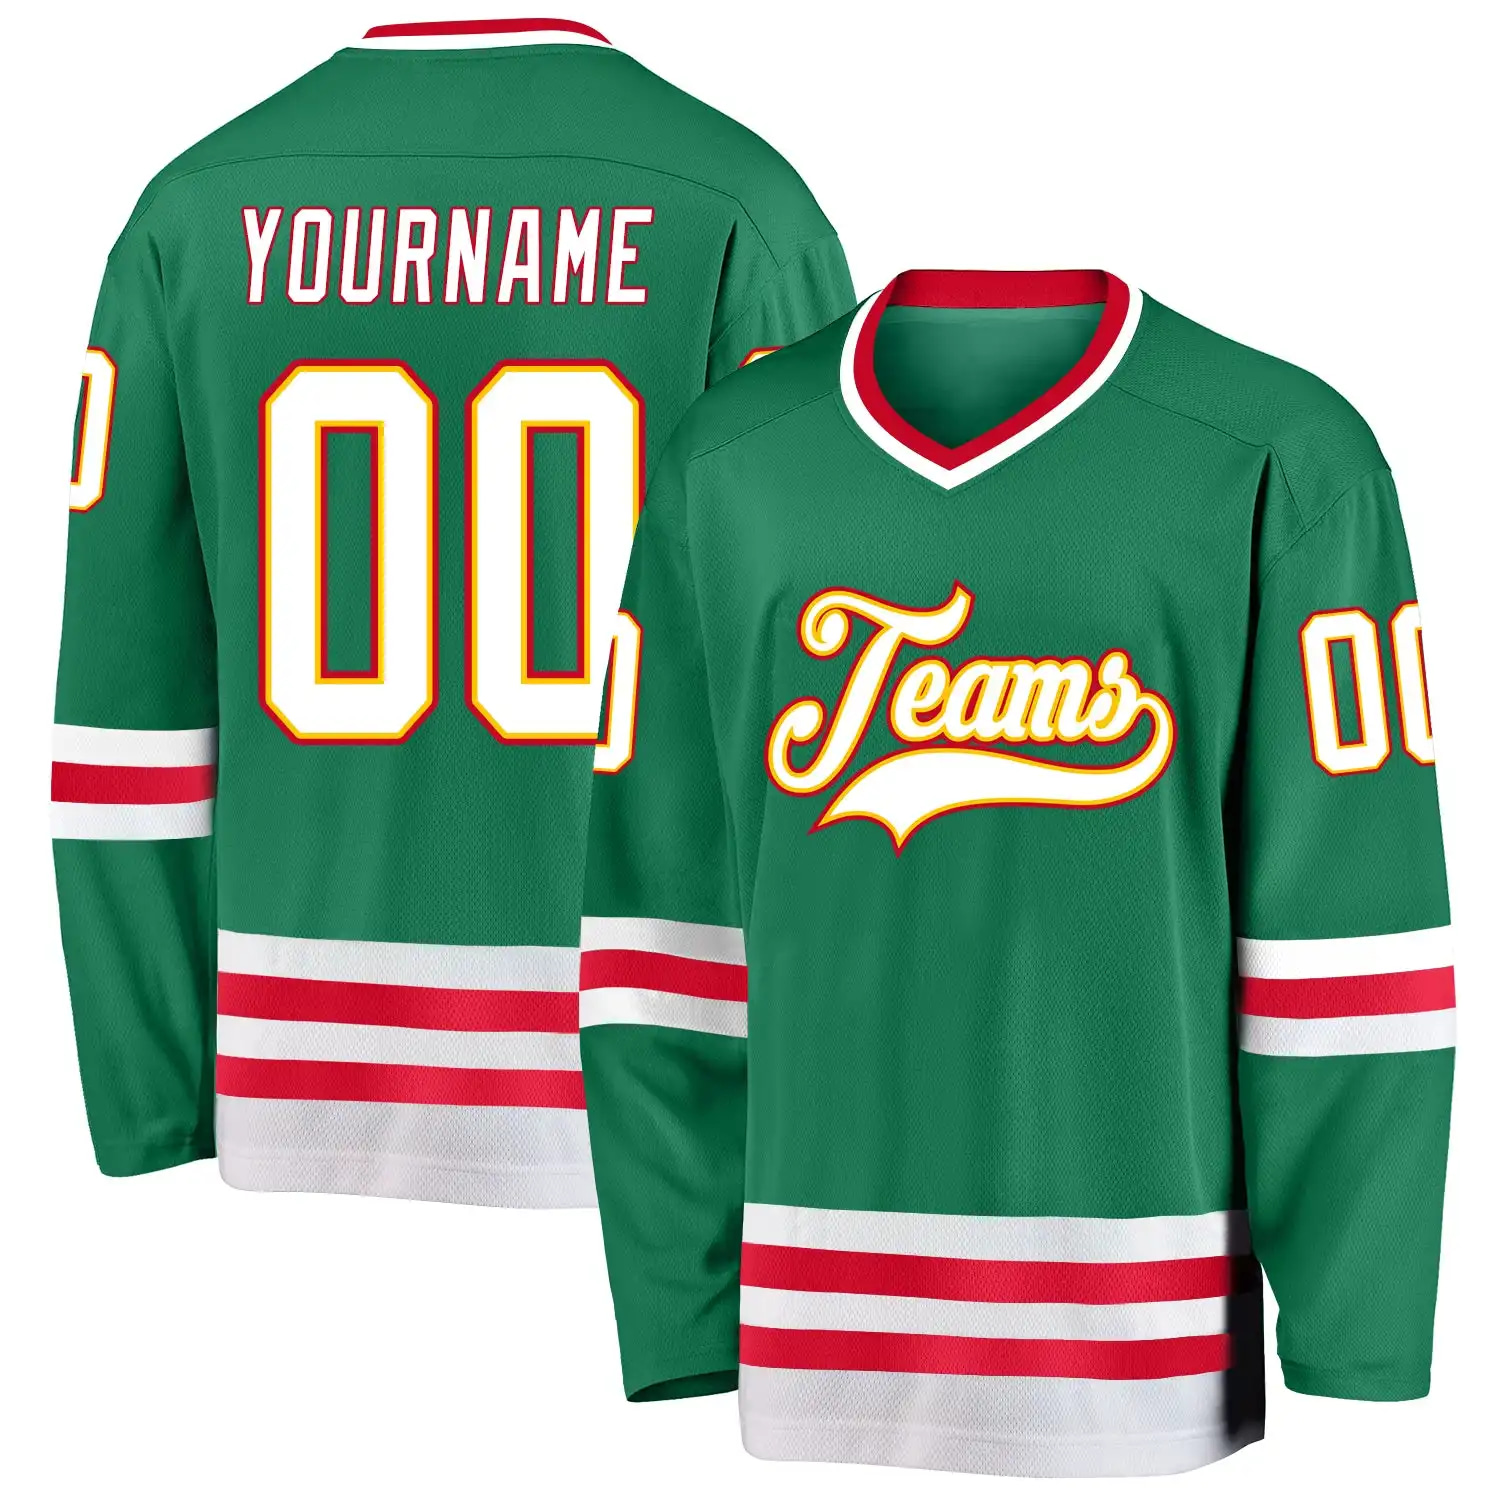 Stitched And Print Kelly Green White-Red Hockey Jersey Custom